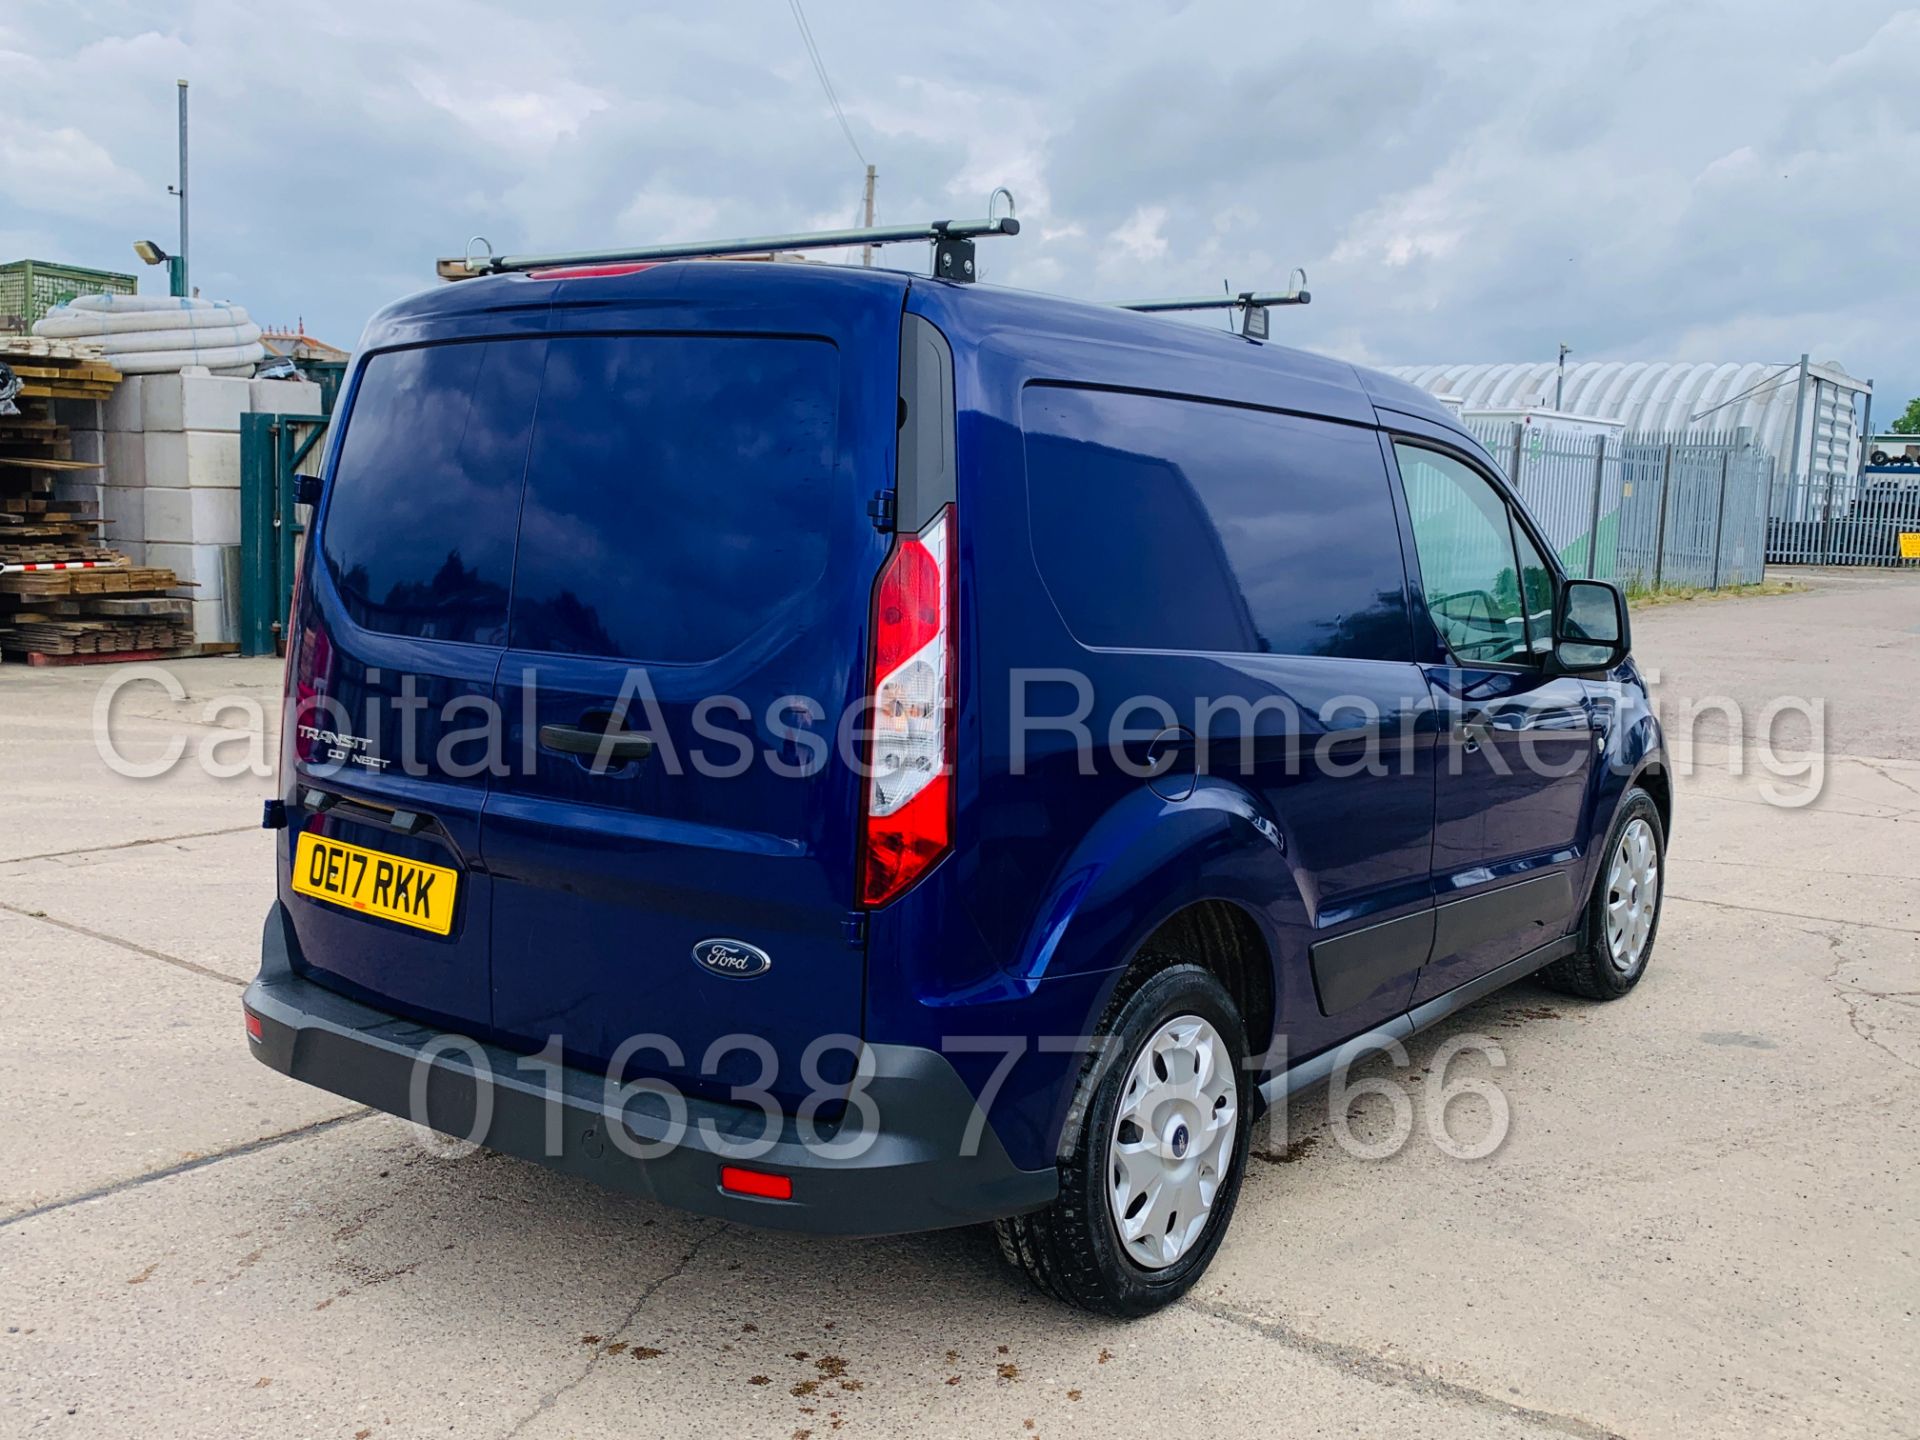 (On Sale) FORD TRANSIT CONNECT *TREND* SWB (2017 - EURO 6 VERSION) '1.5 TDCI - 100 BHP' (1 OWNER) - Image 8 of 39